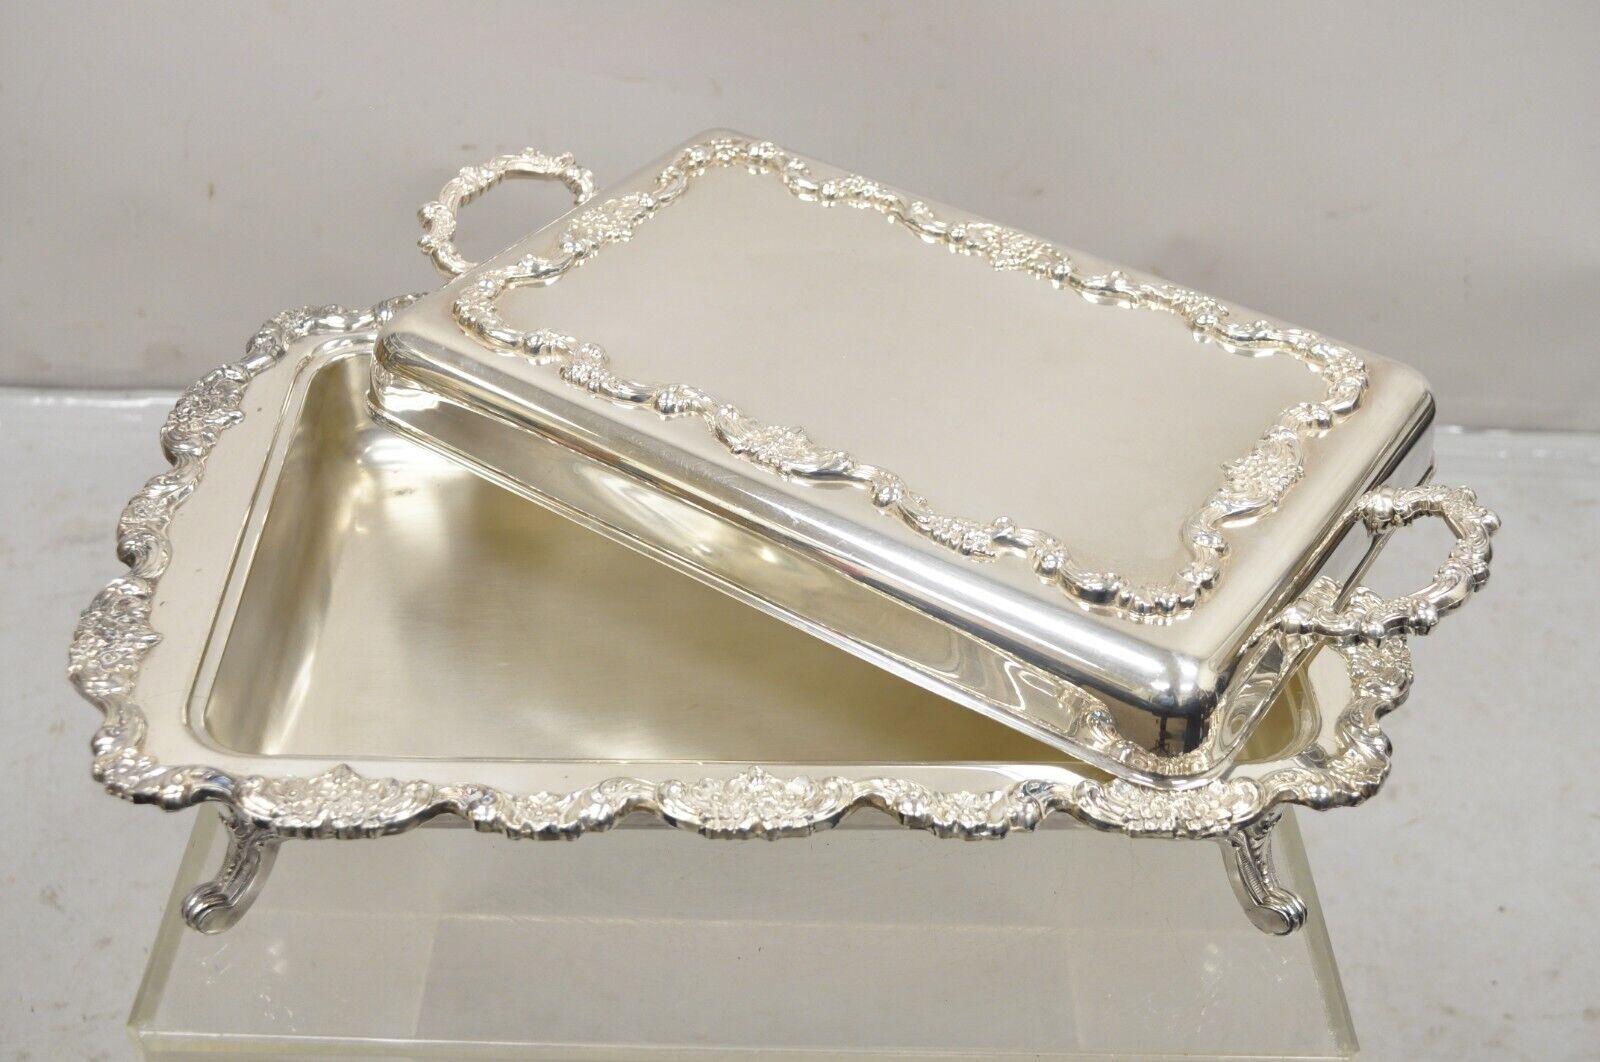 Vintage Poole Silver Co. Victorian Style Silver Plated Large Lidded Covered Serving Platter Dish. Item featured is a large impressive size, ornate floral handles and border, original hallmark, raised on feet. Circa Mid 20th Century. Measurements: 